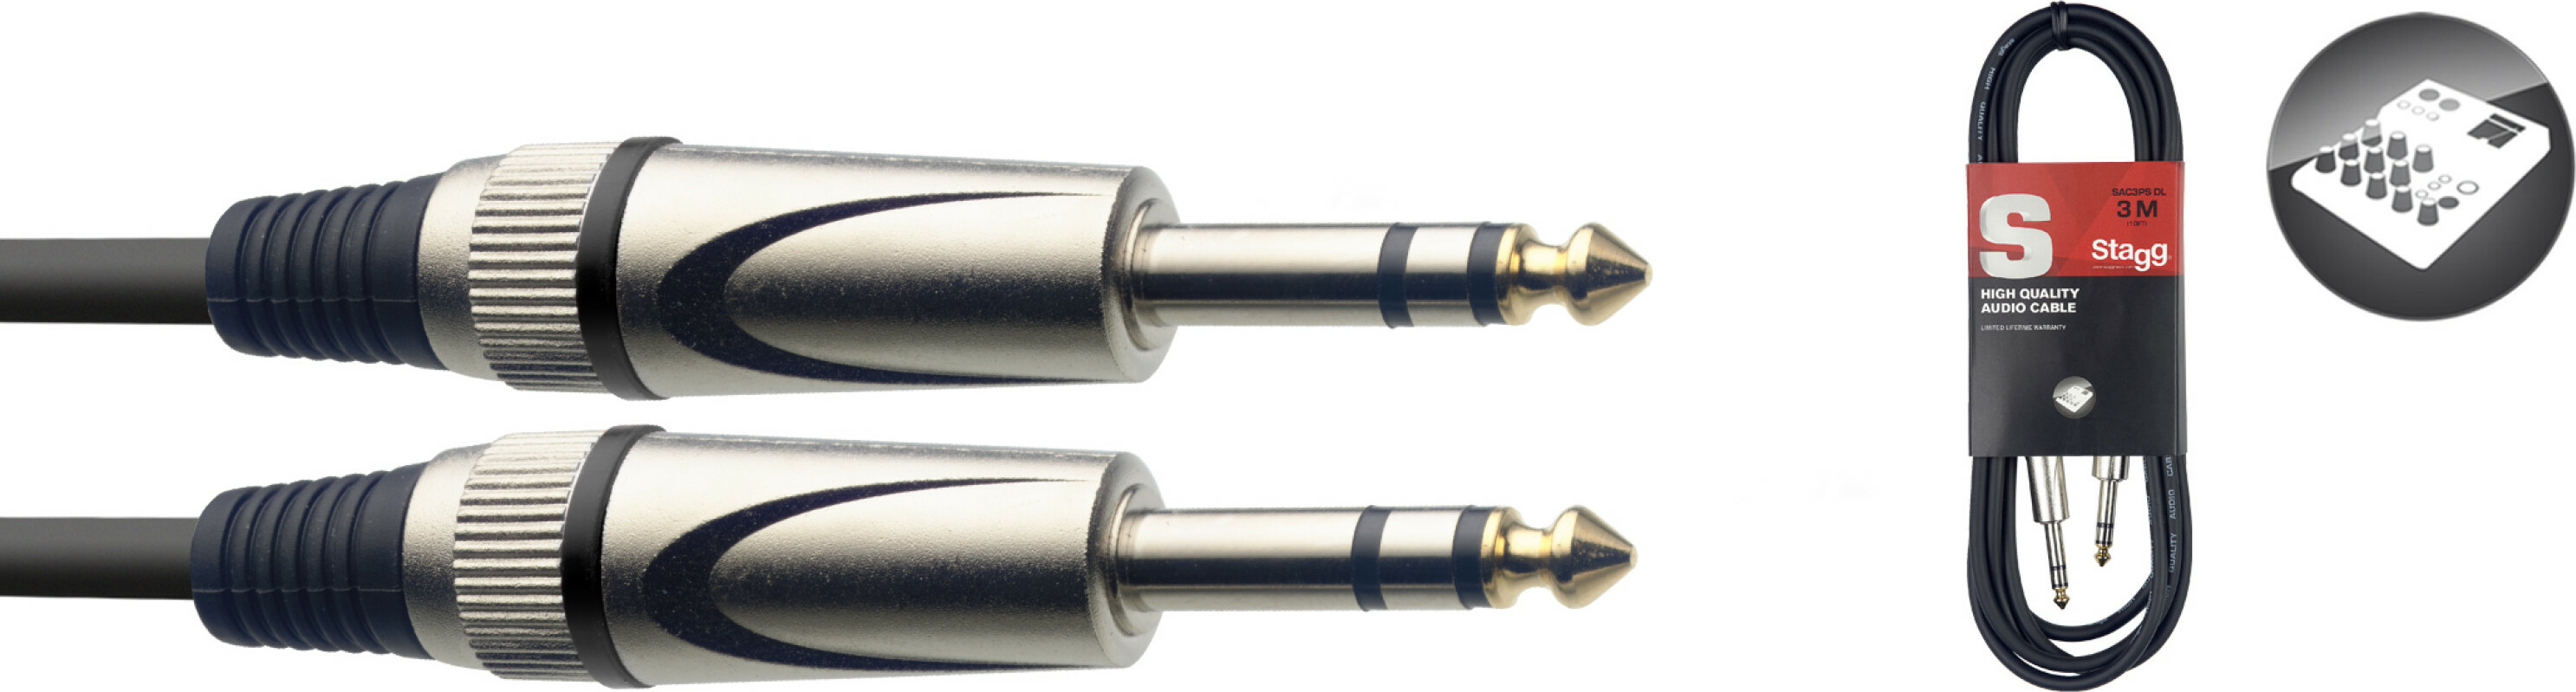 Stagg Sac3ps Dl Cable Audio Jckm Stereo Dlx 3m - Kabel - Main picture